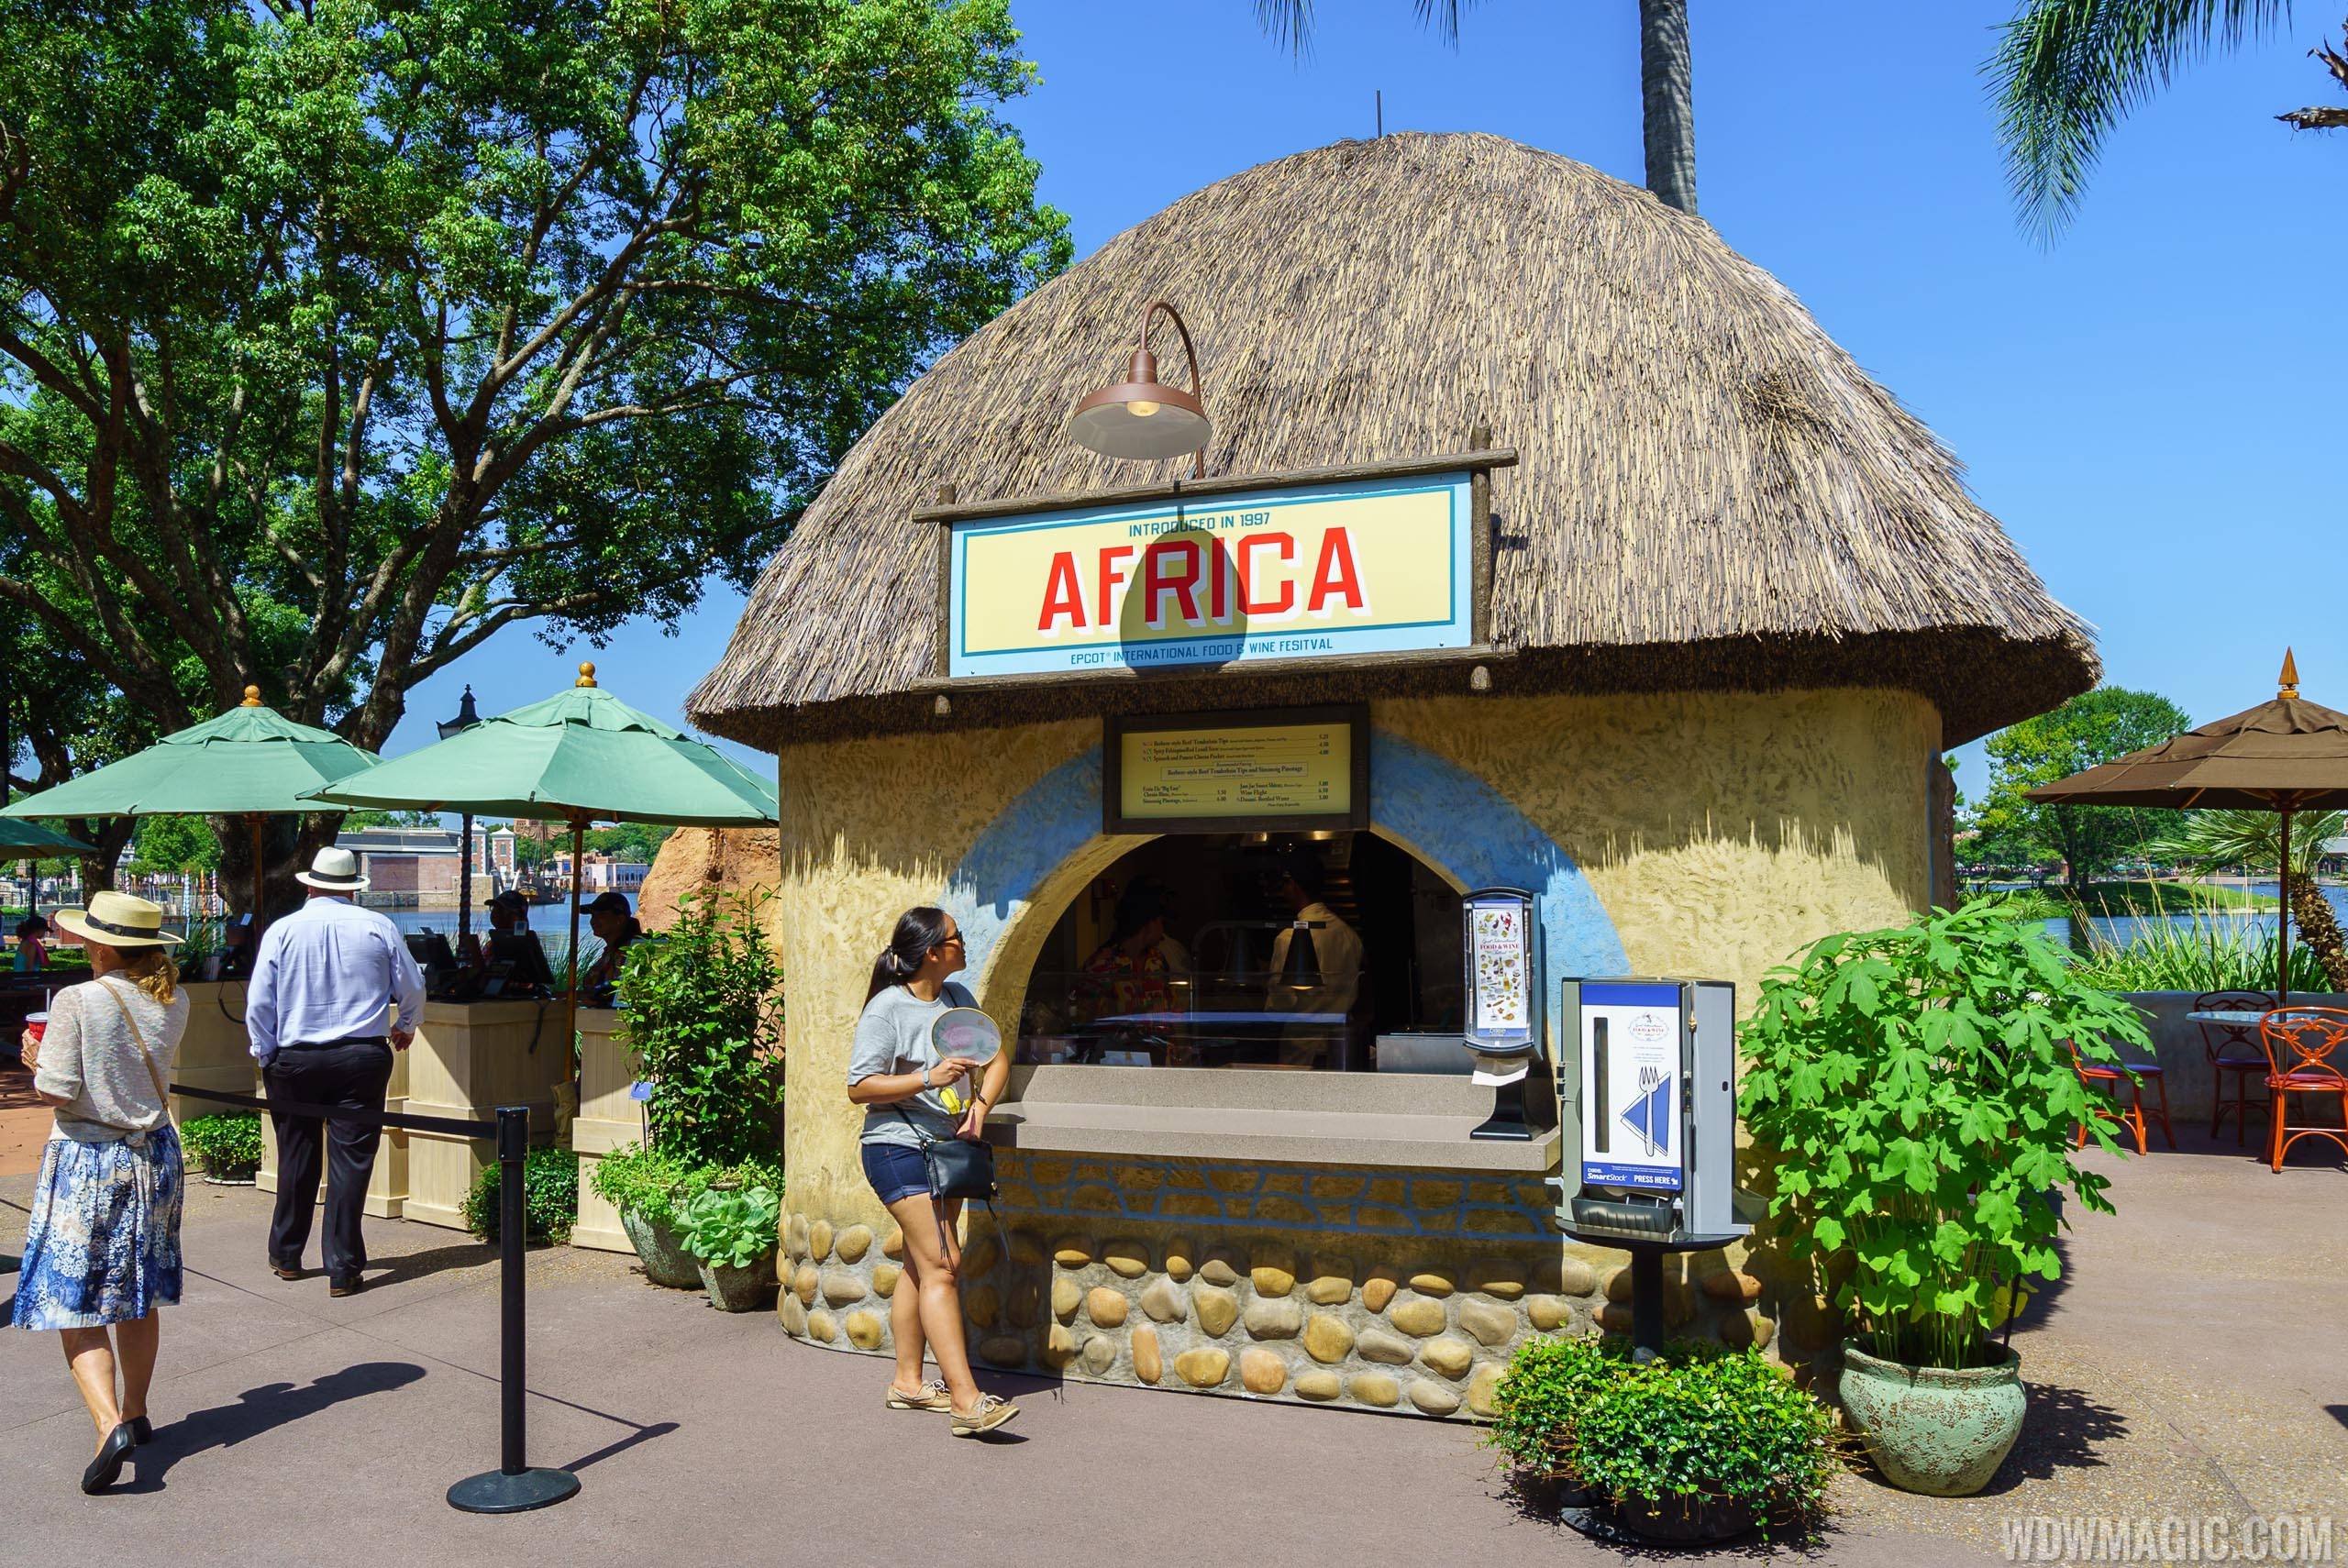 2017 Epcot Food and Wine Festival - Africa marketplace kiosk